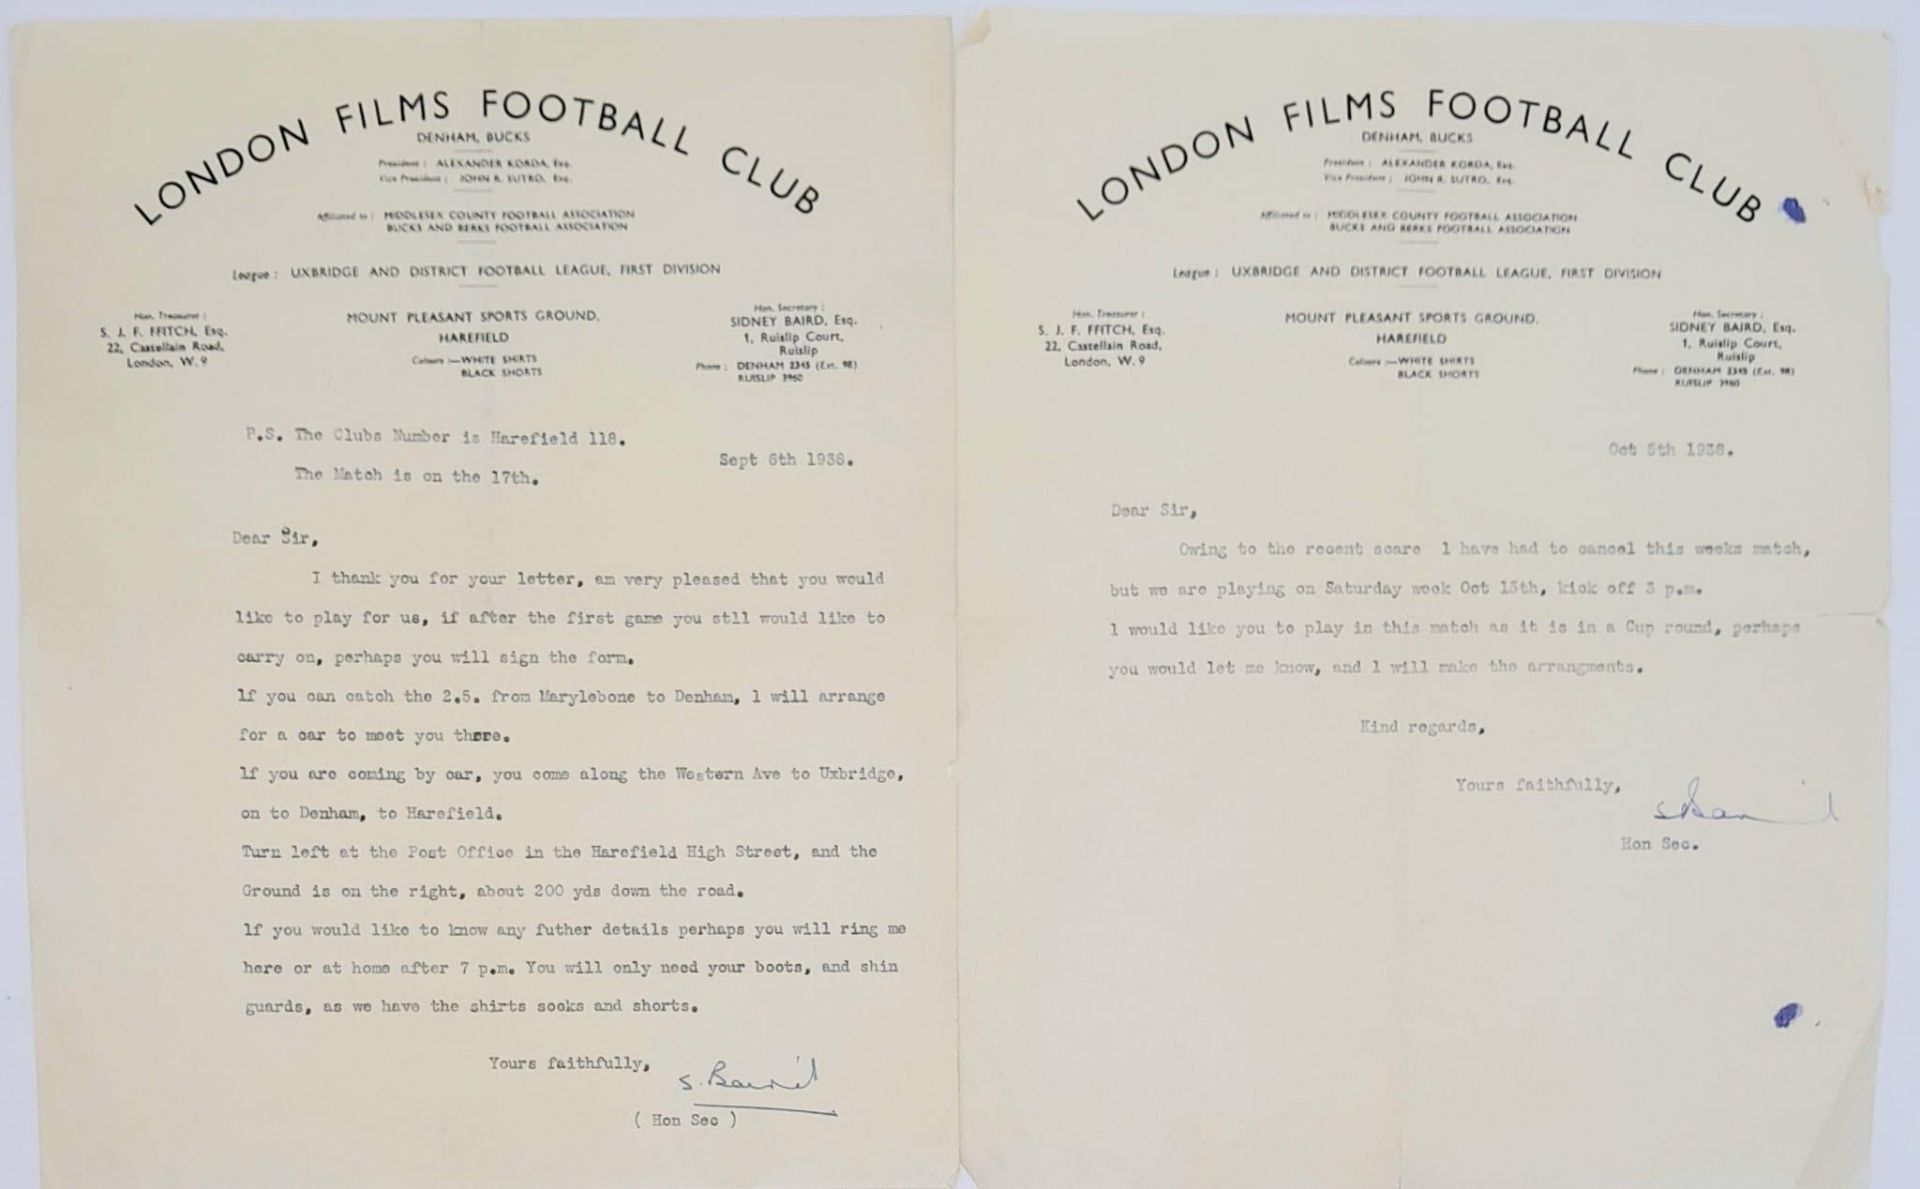 An Eclectic Piece of Football Memorabilia - Two letters from London Films football club believe to - Image 2 of 5